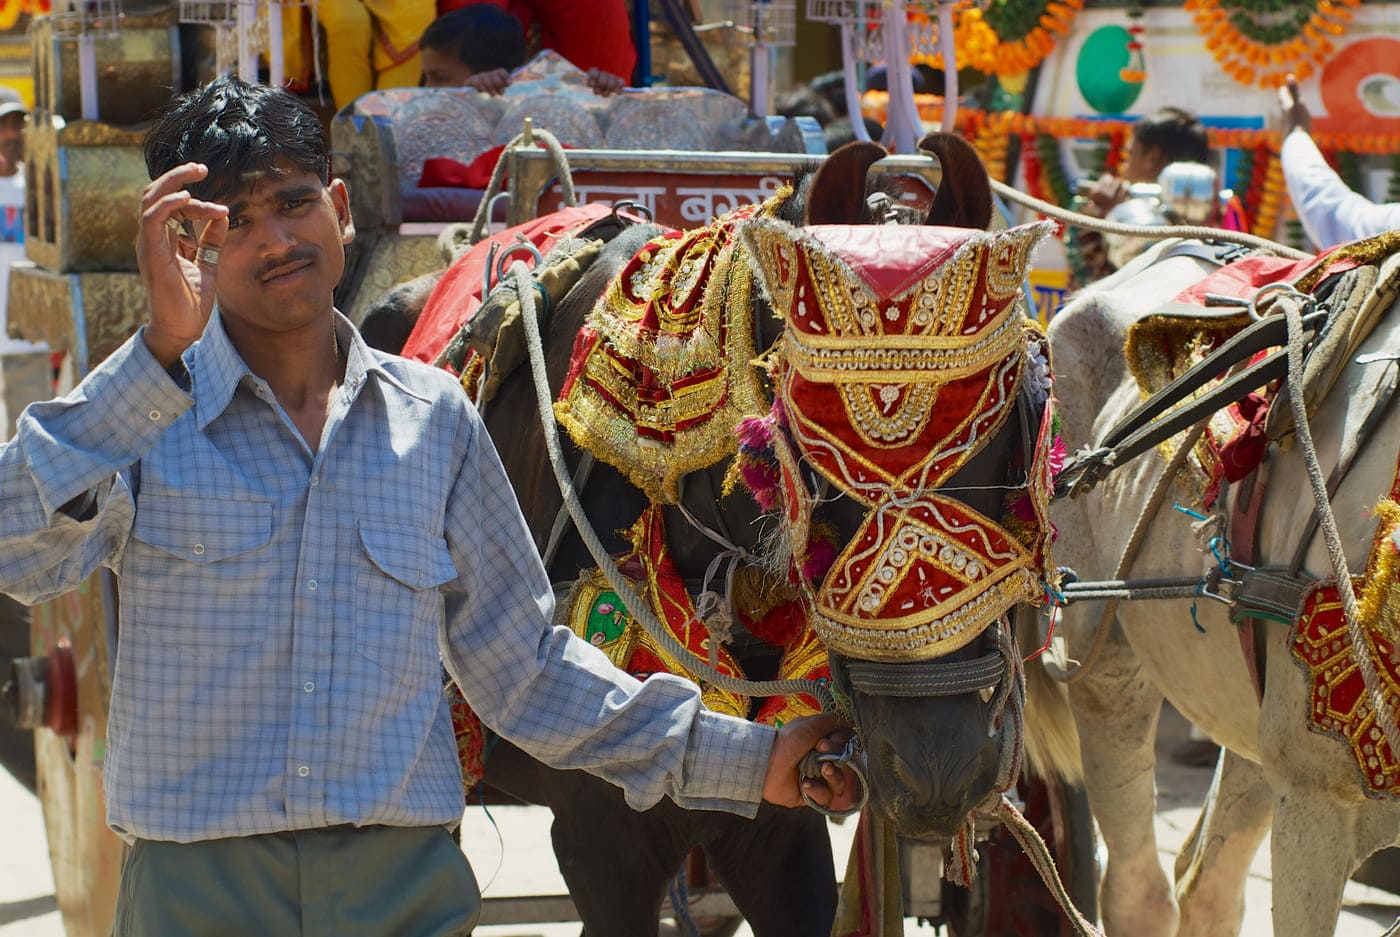 Decorated horses being held by a man on a street in Orchha during a religious ceremony 